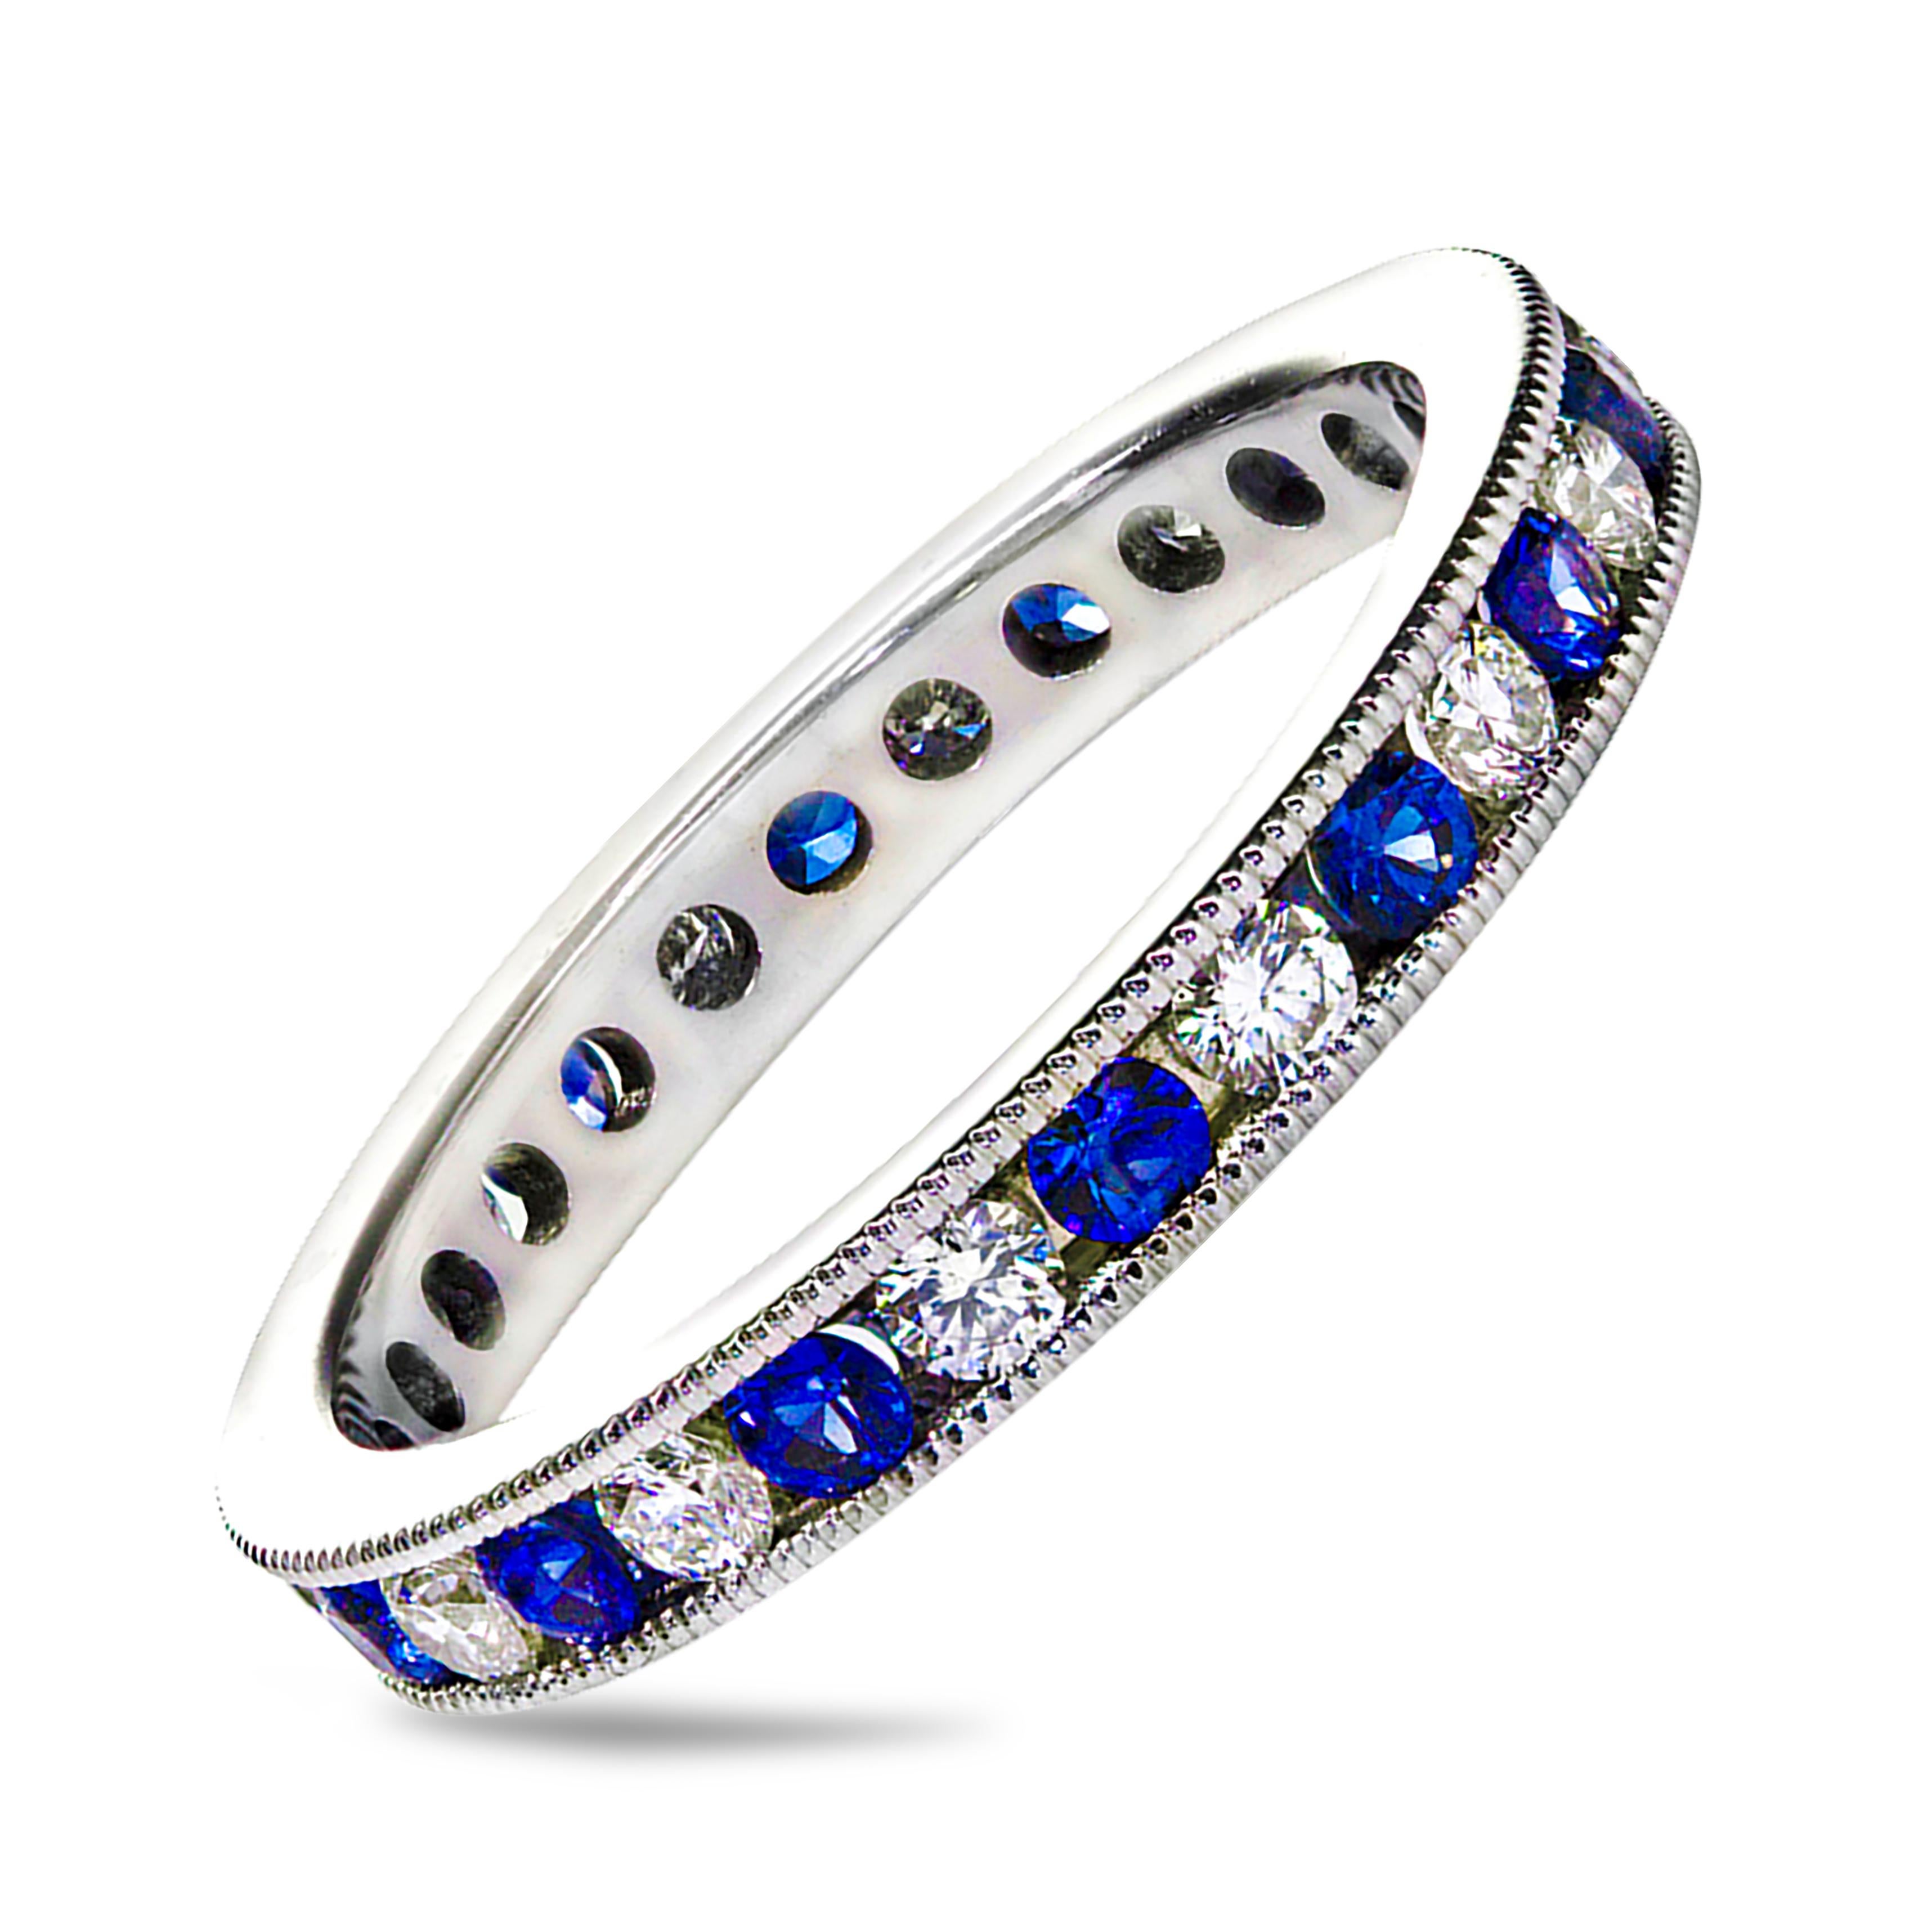 A well-crafted wedding band, showcasing round cut blue sapphires weighing 0.62 carats, alternating with round white diamonds weighing 0.50 carats. The stones weigh 1.12 carats total. Channel set and finished with intricate milgrain edges. Made with